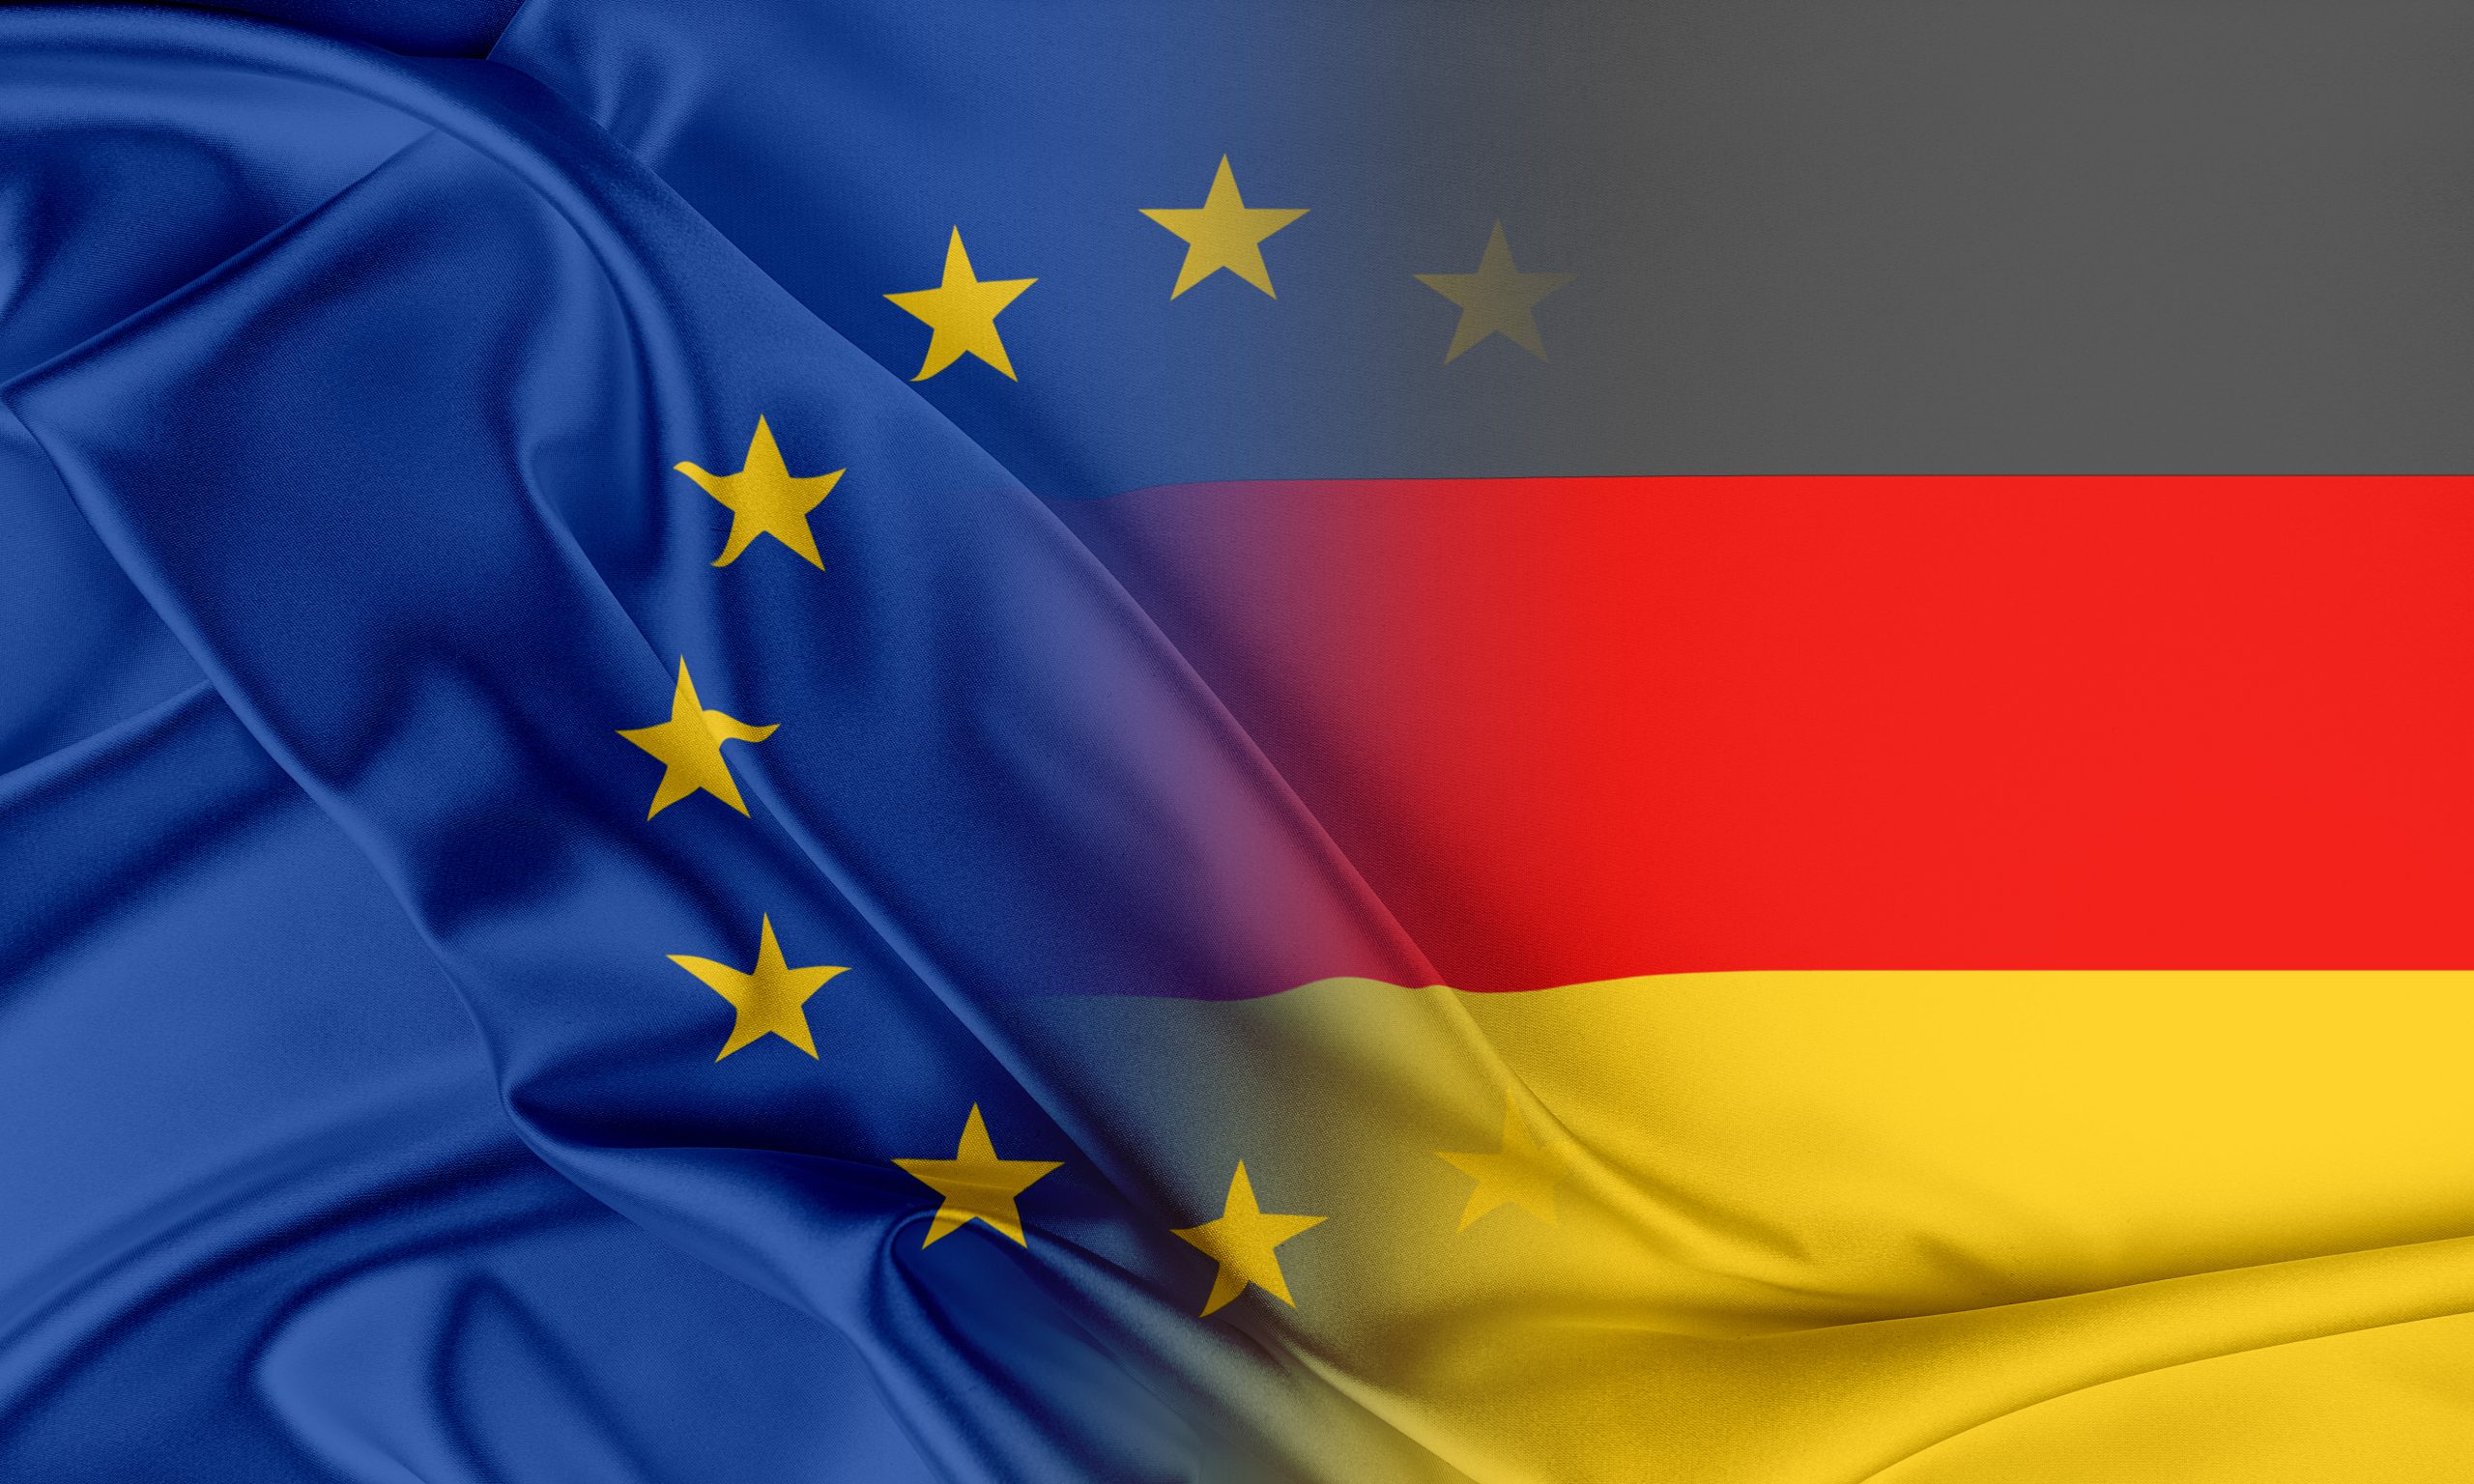 European Union and Germany. The concept of relationship between EU and Germany.